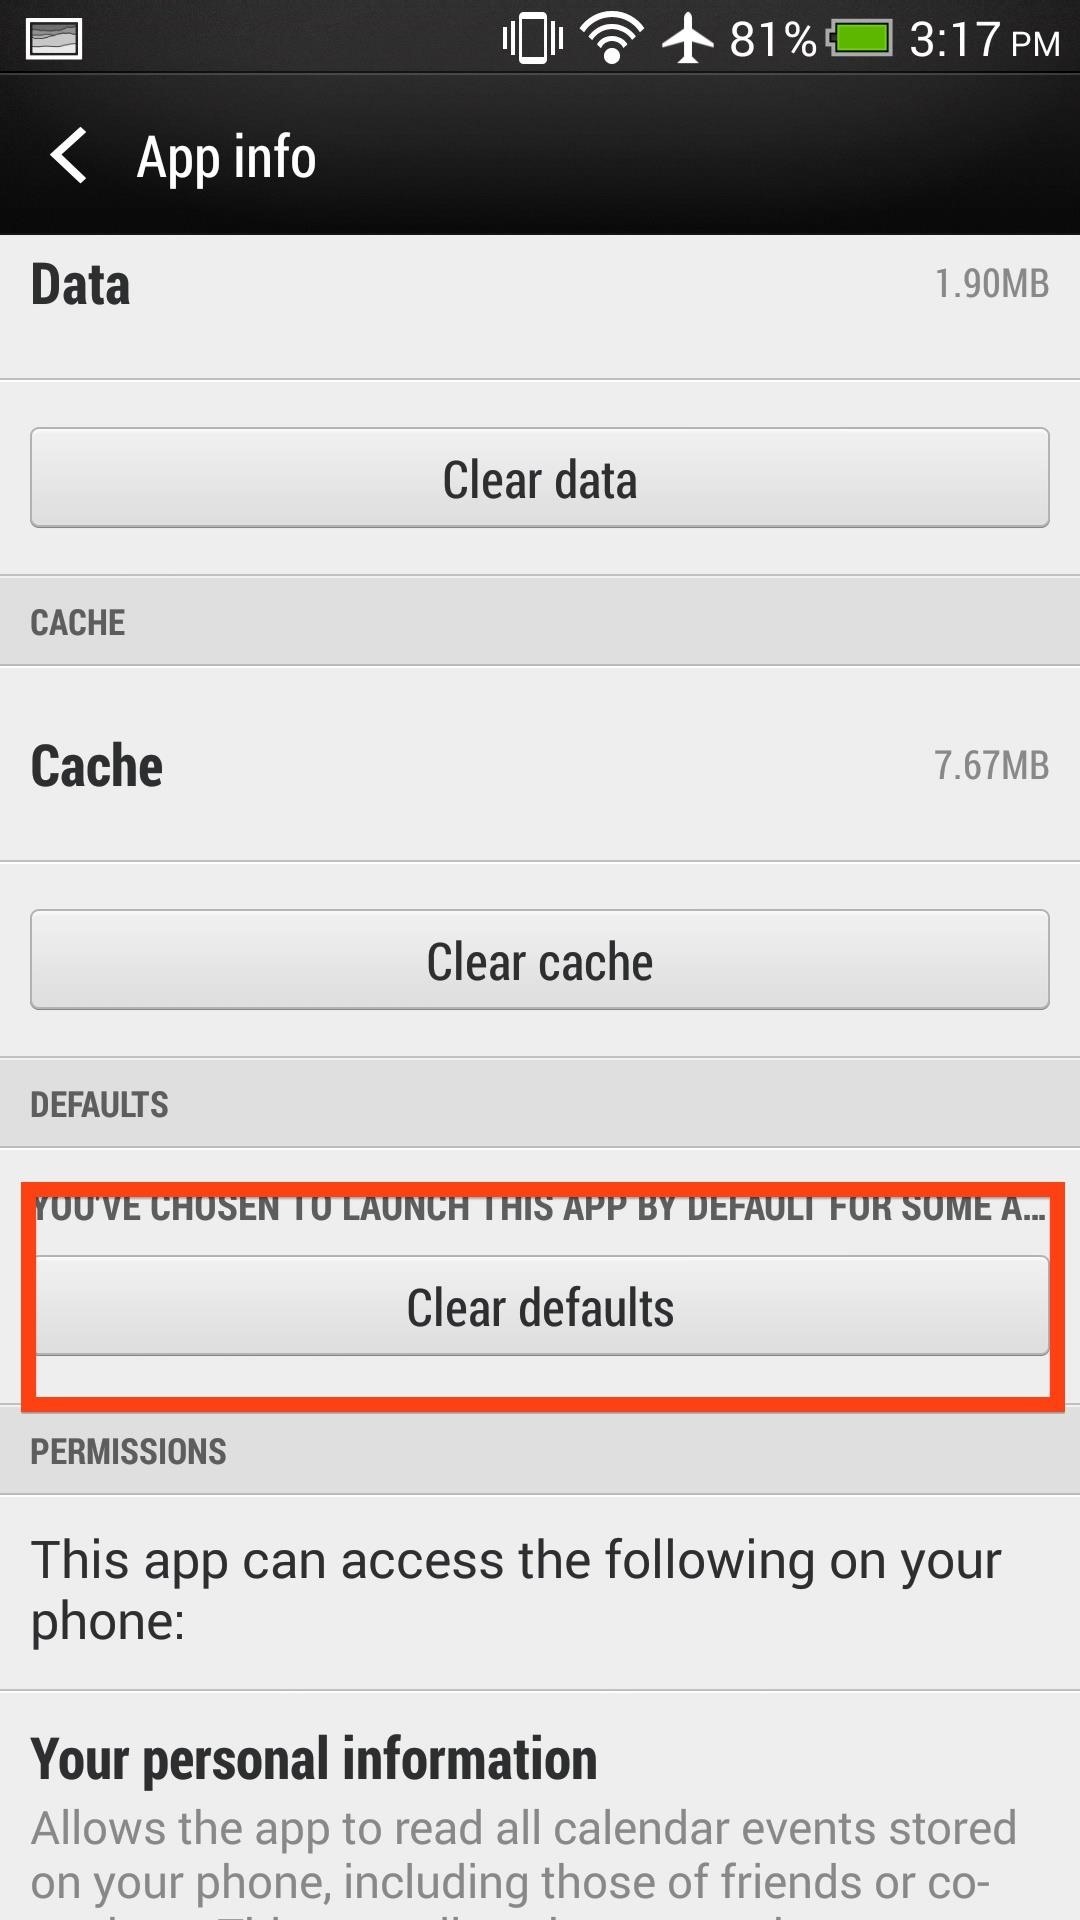 How to Revert Back to the Default Sense Launcher or Switch to a New Launcher on Your HTC One